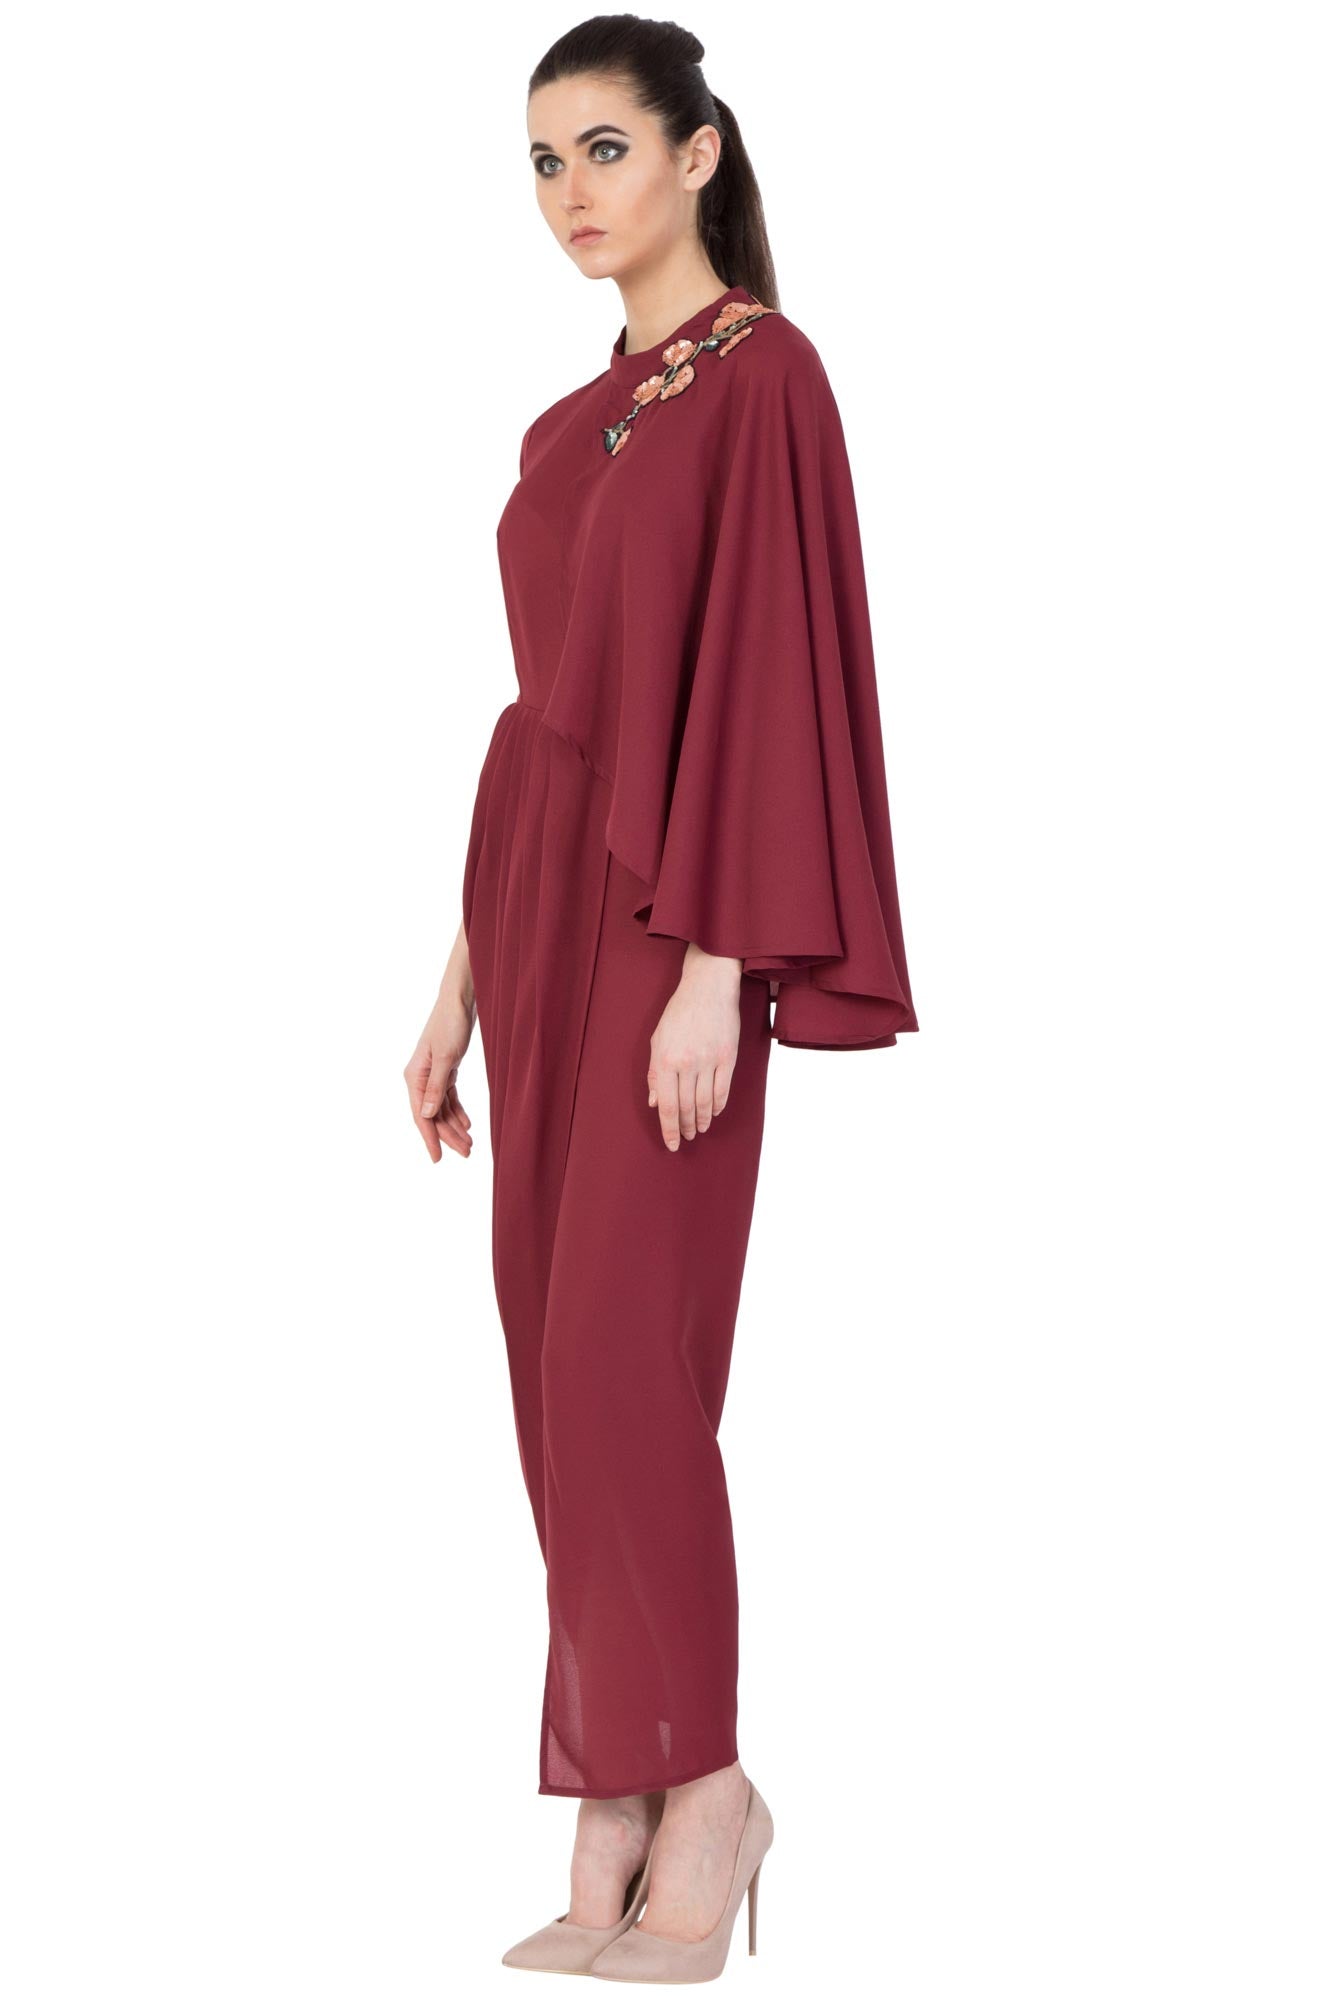 Maroon Floral Embroidered Drape Dress